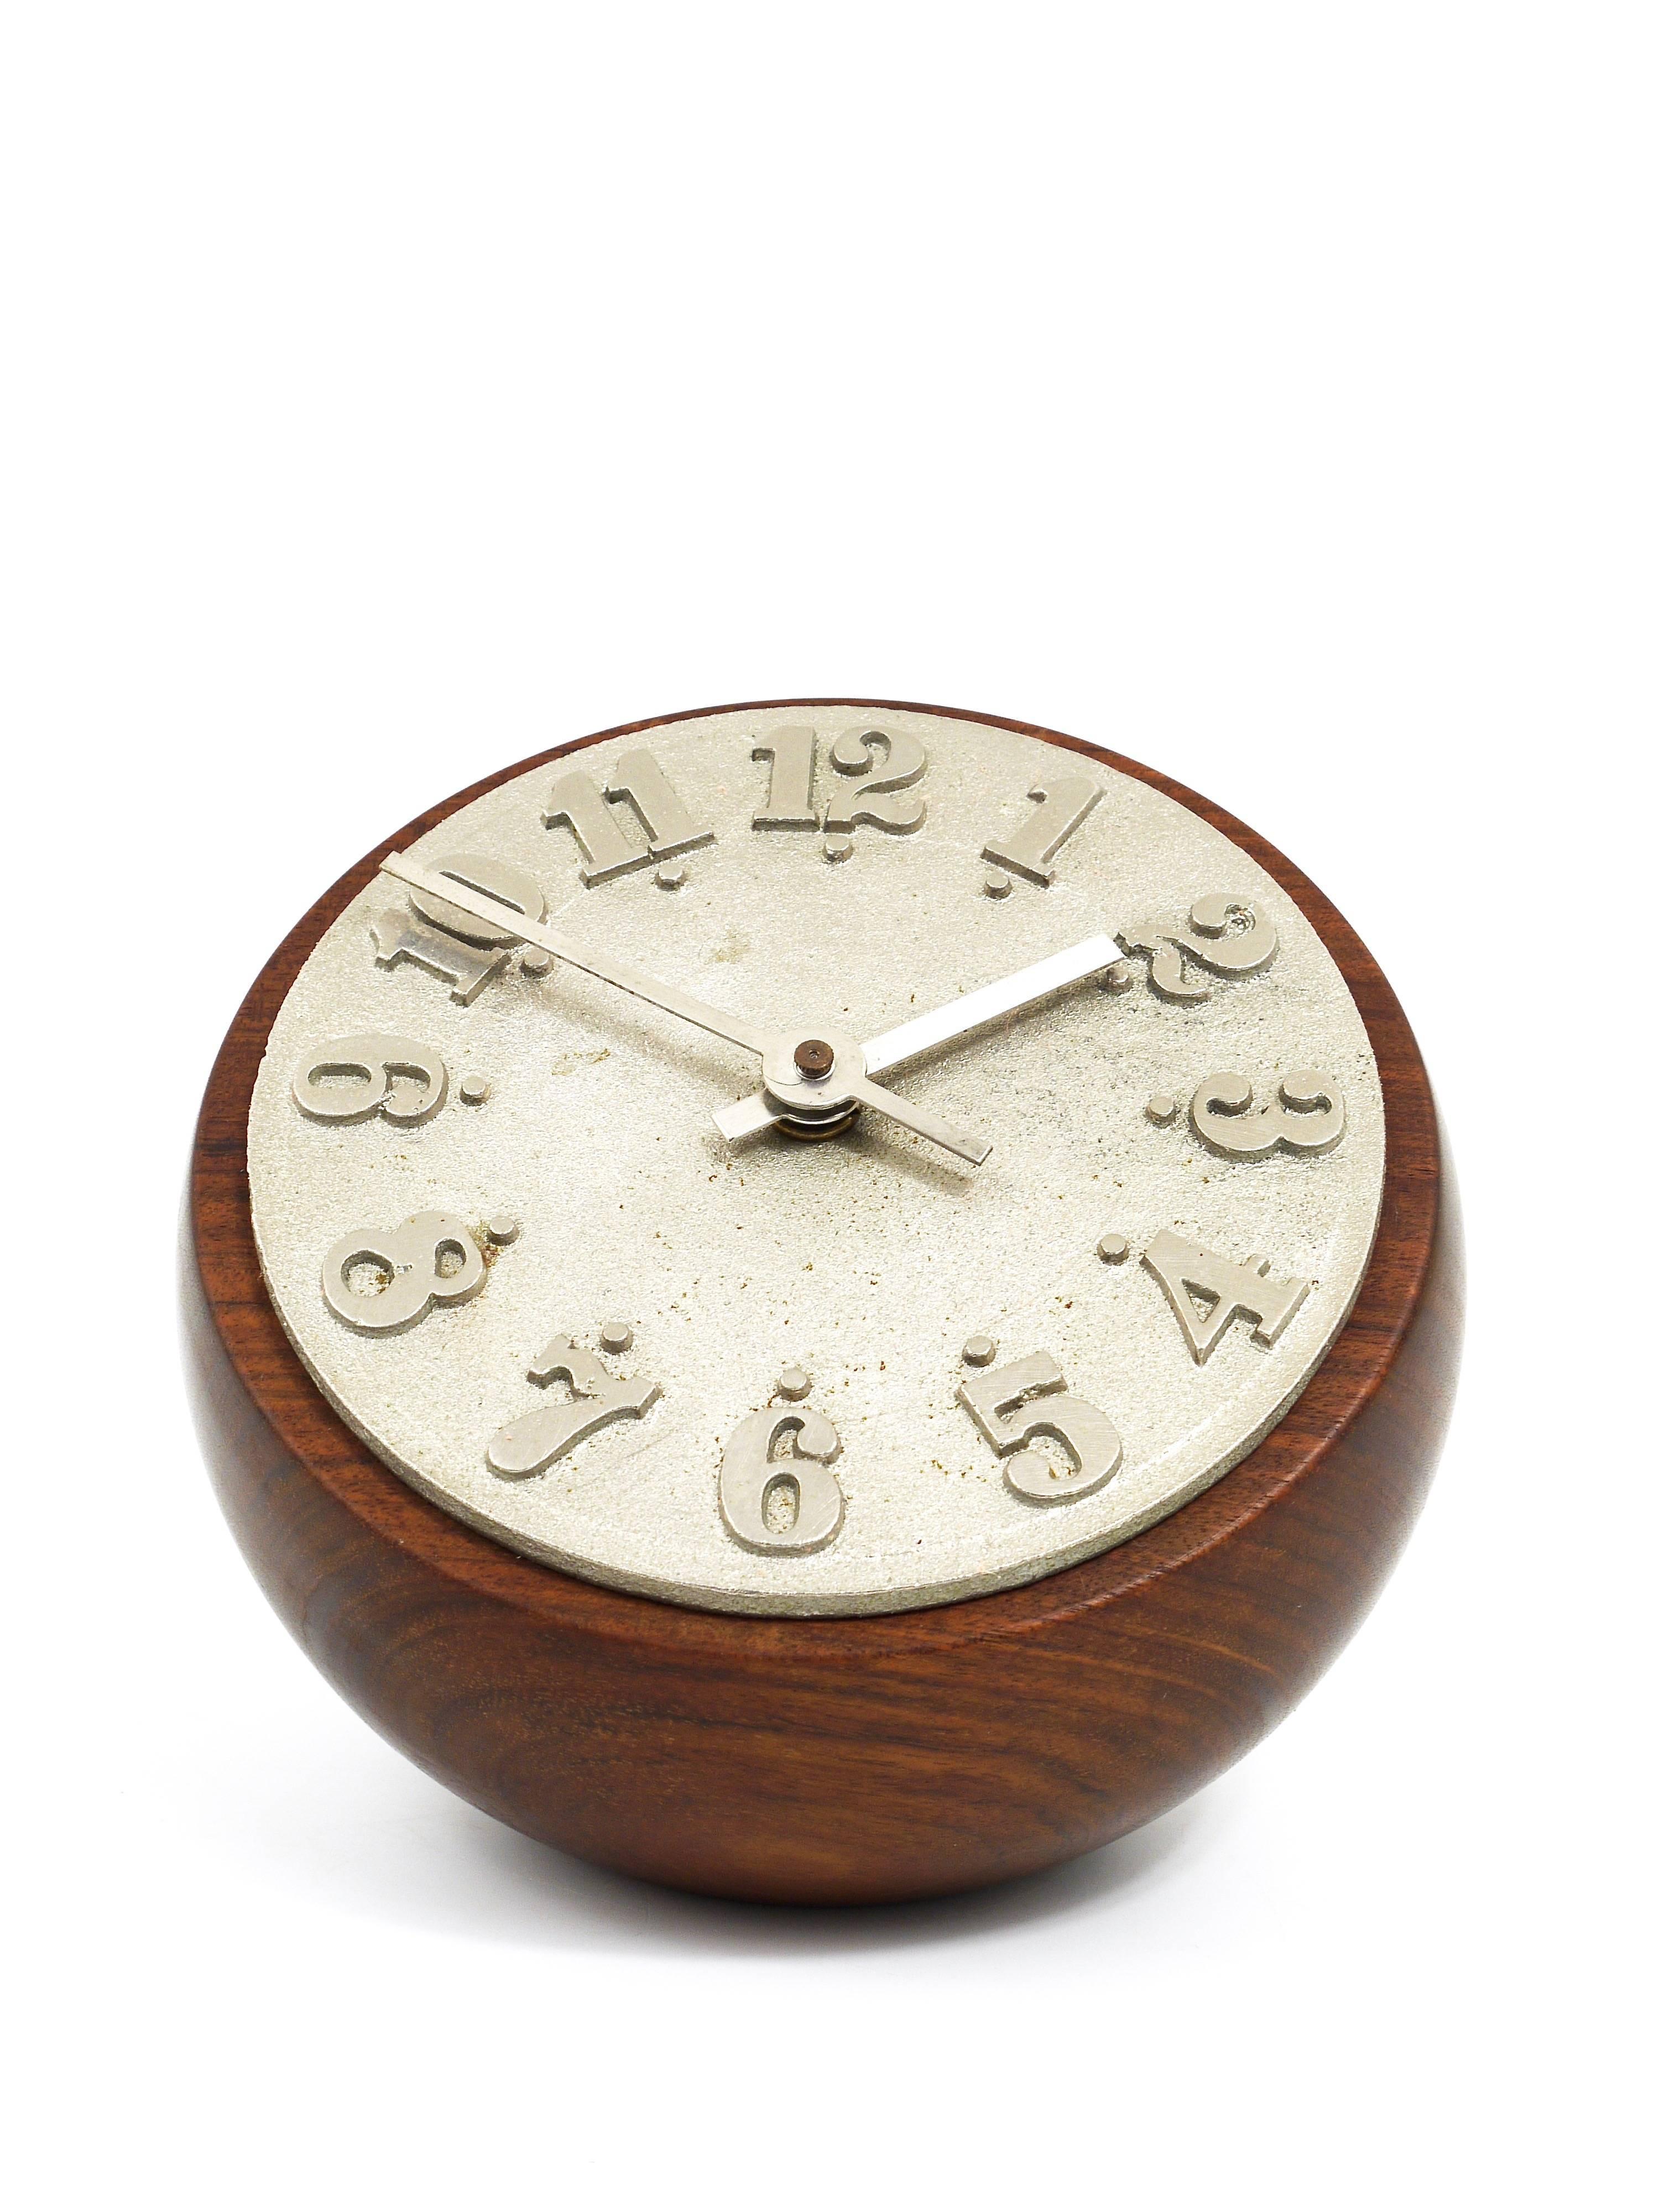 A beautiful desk or table clock, designed and executed by Carl Auböck, Austria, 1950s. Has a round housing made of walnut, the clocks face ist made of nickel-plated cast-iron. Battery-operated movement. In excellent condition. Our favourite clock.